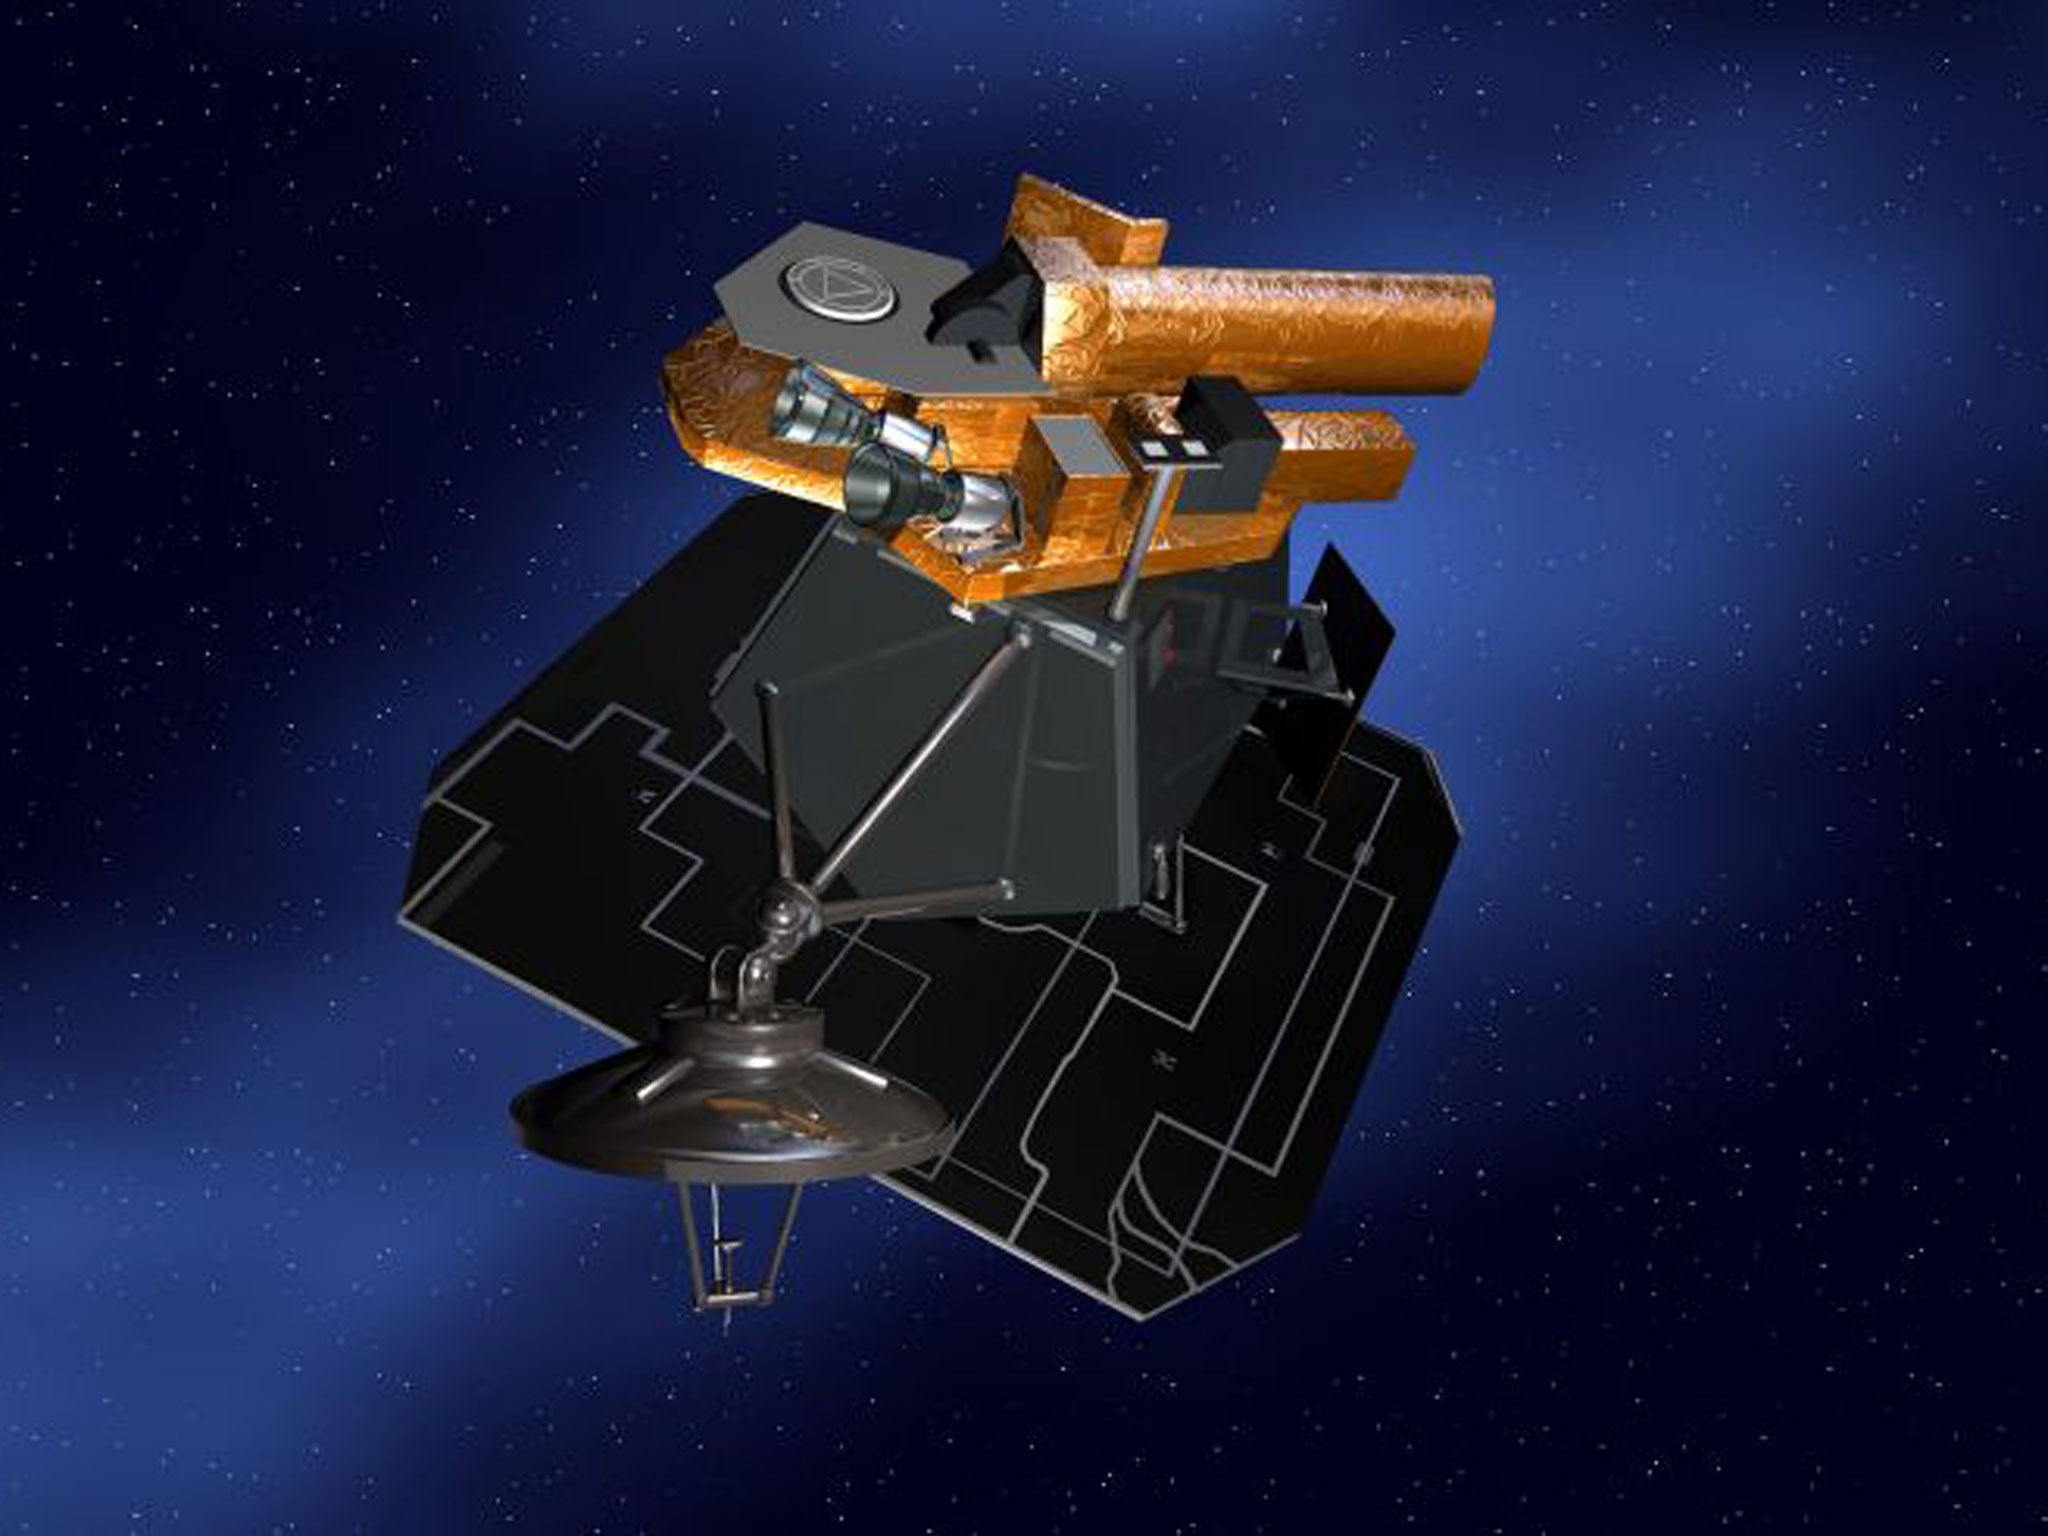 NASA artist's concept for Deep Impact, a comet research spacecraft